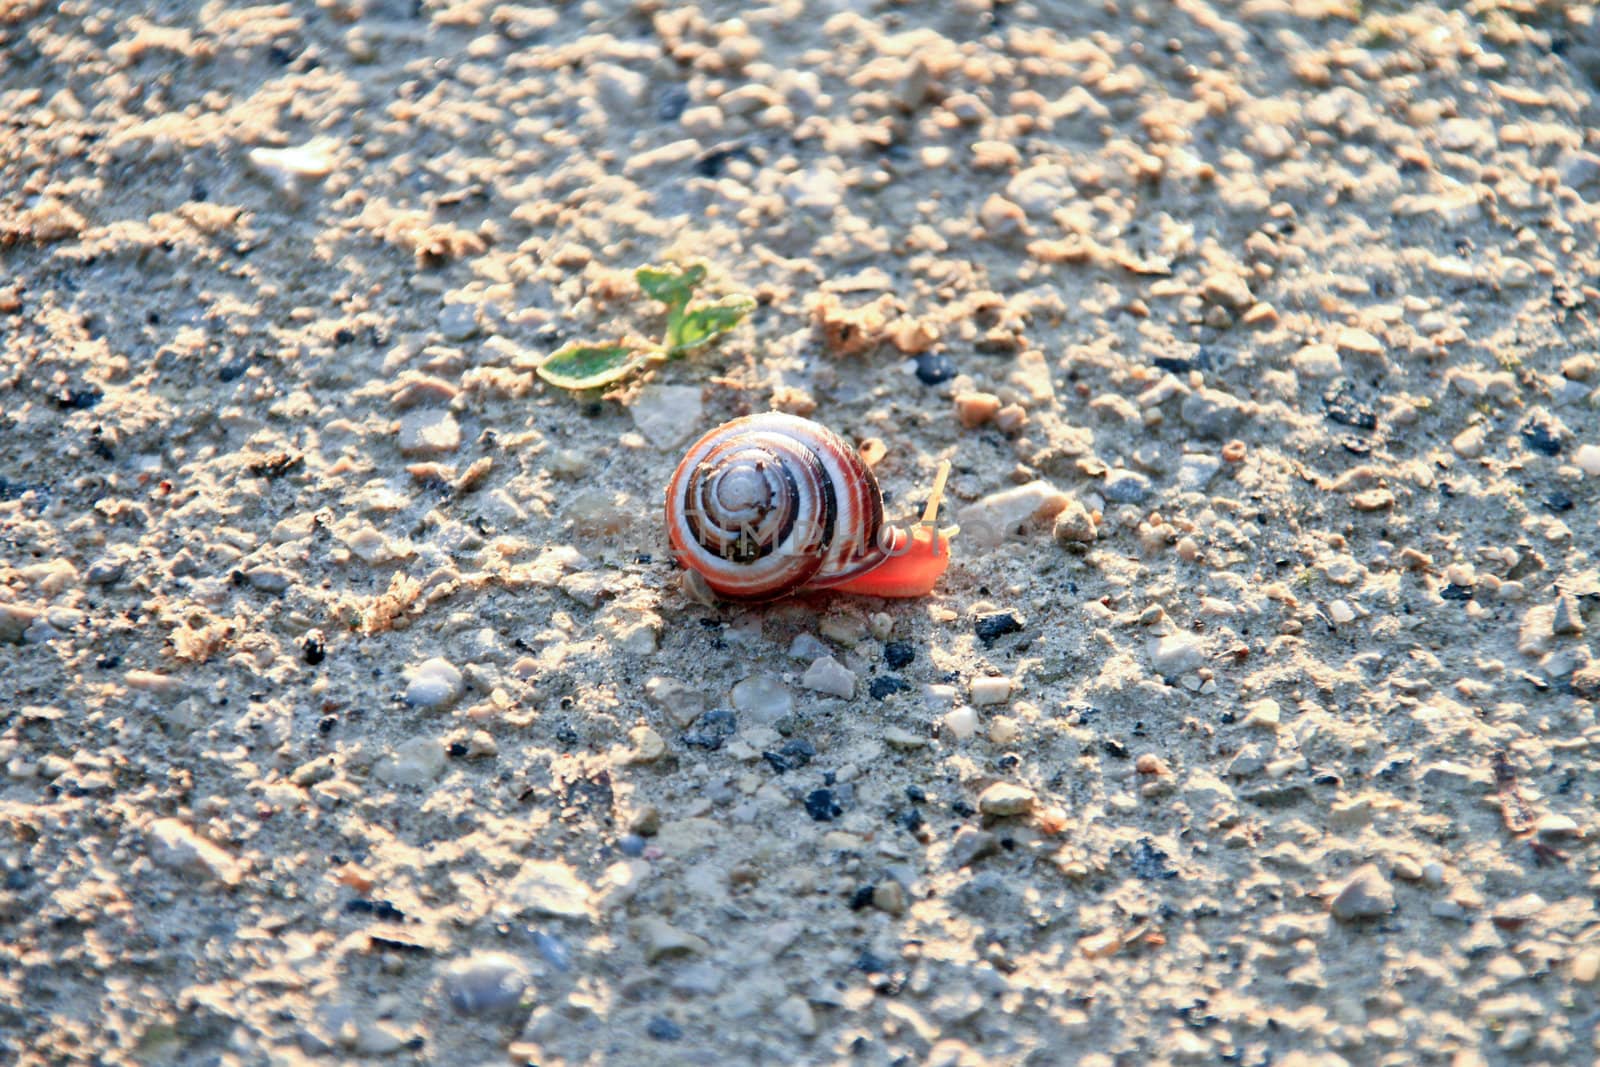 Shot of a small,pink snail on the ground